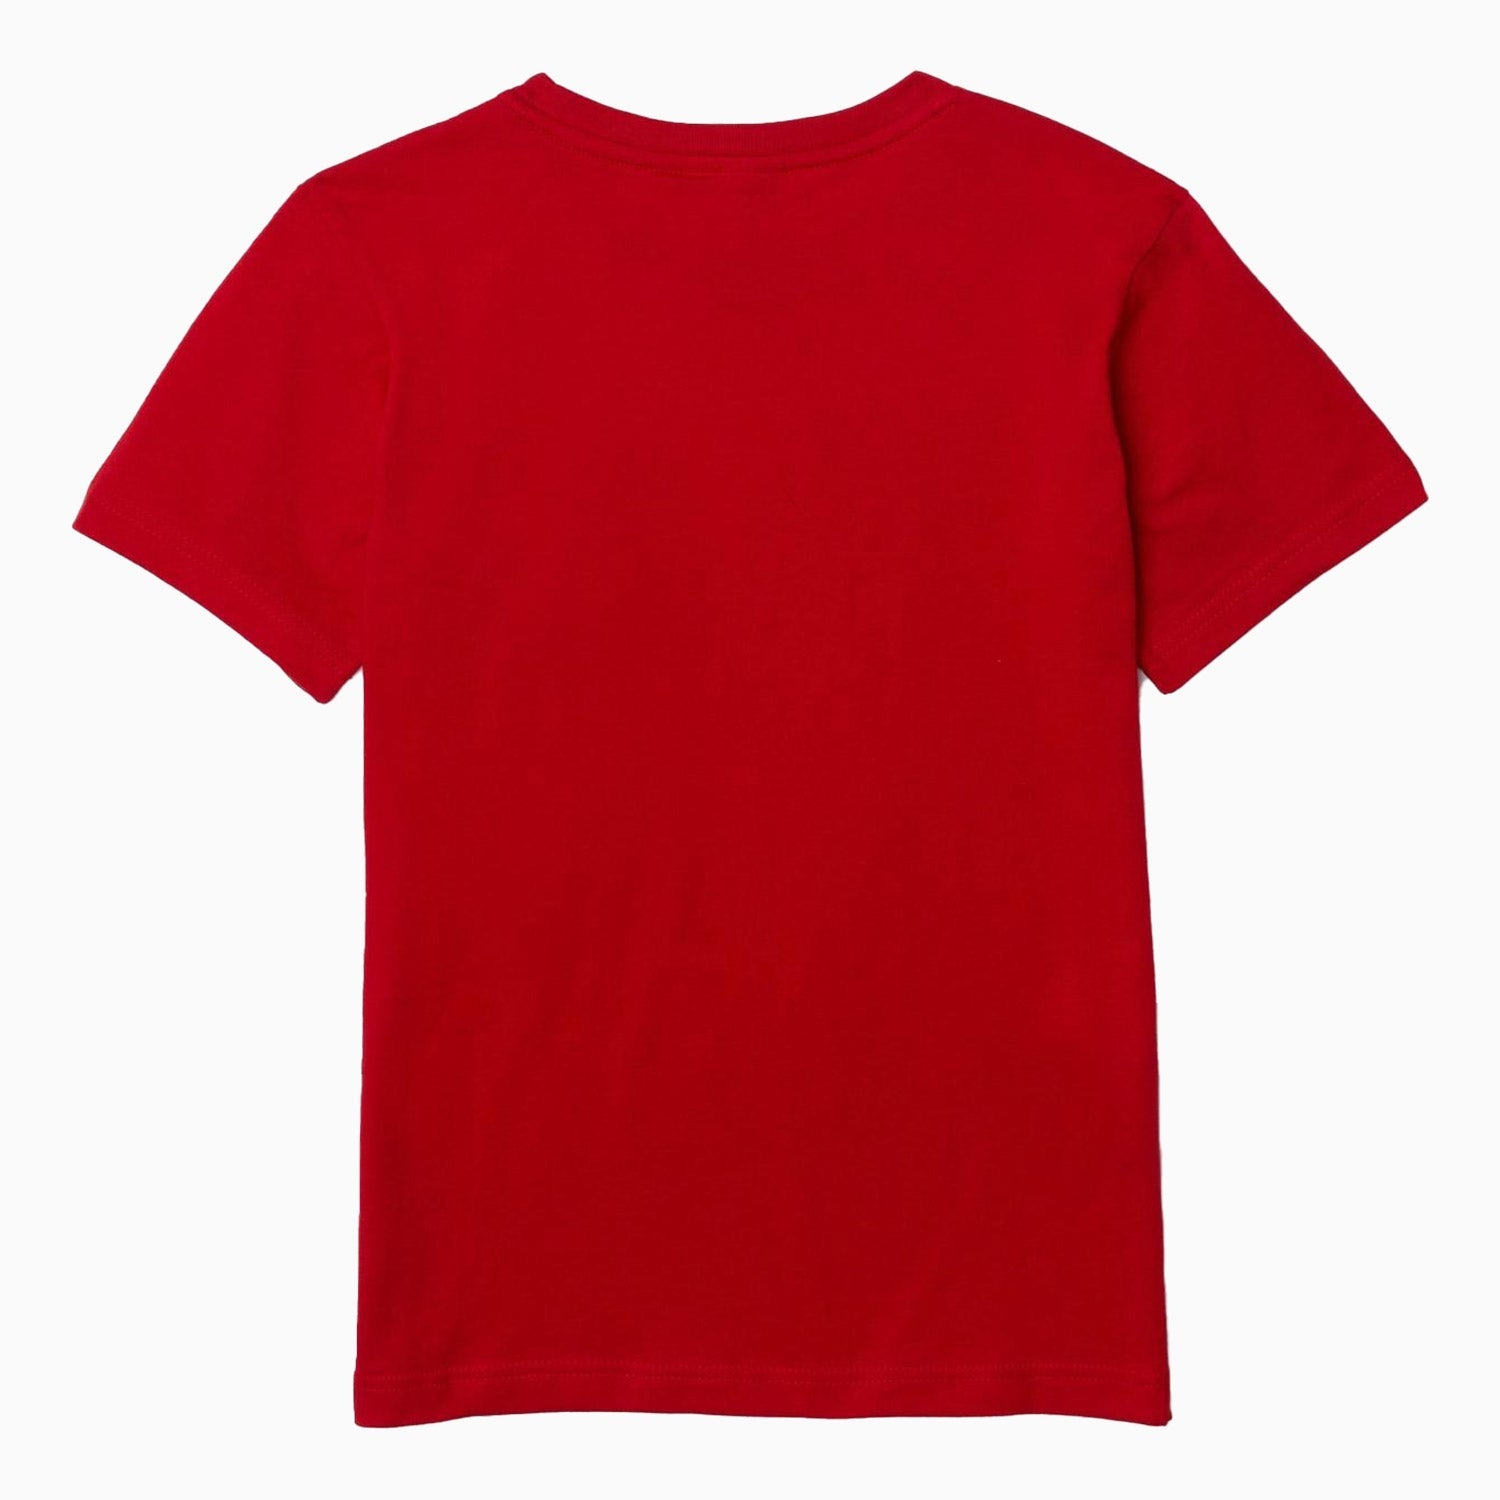 Lacoste Kid's Solid Sportswear T Shirt - Color: Infrared - Kids Premium Clothing -